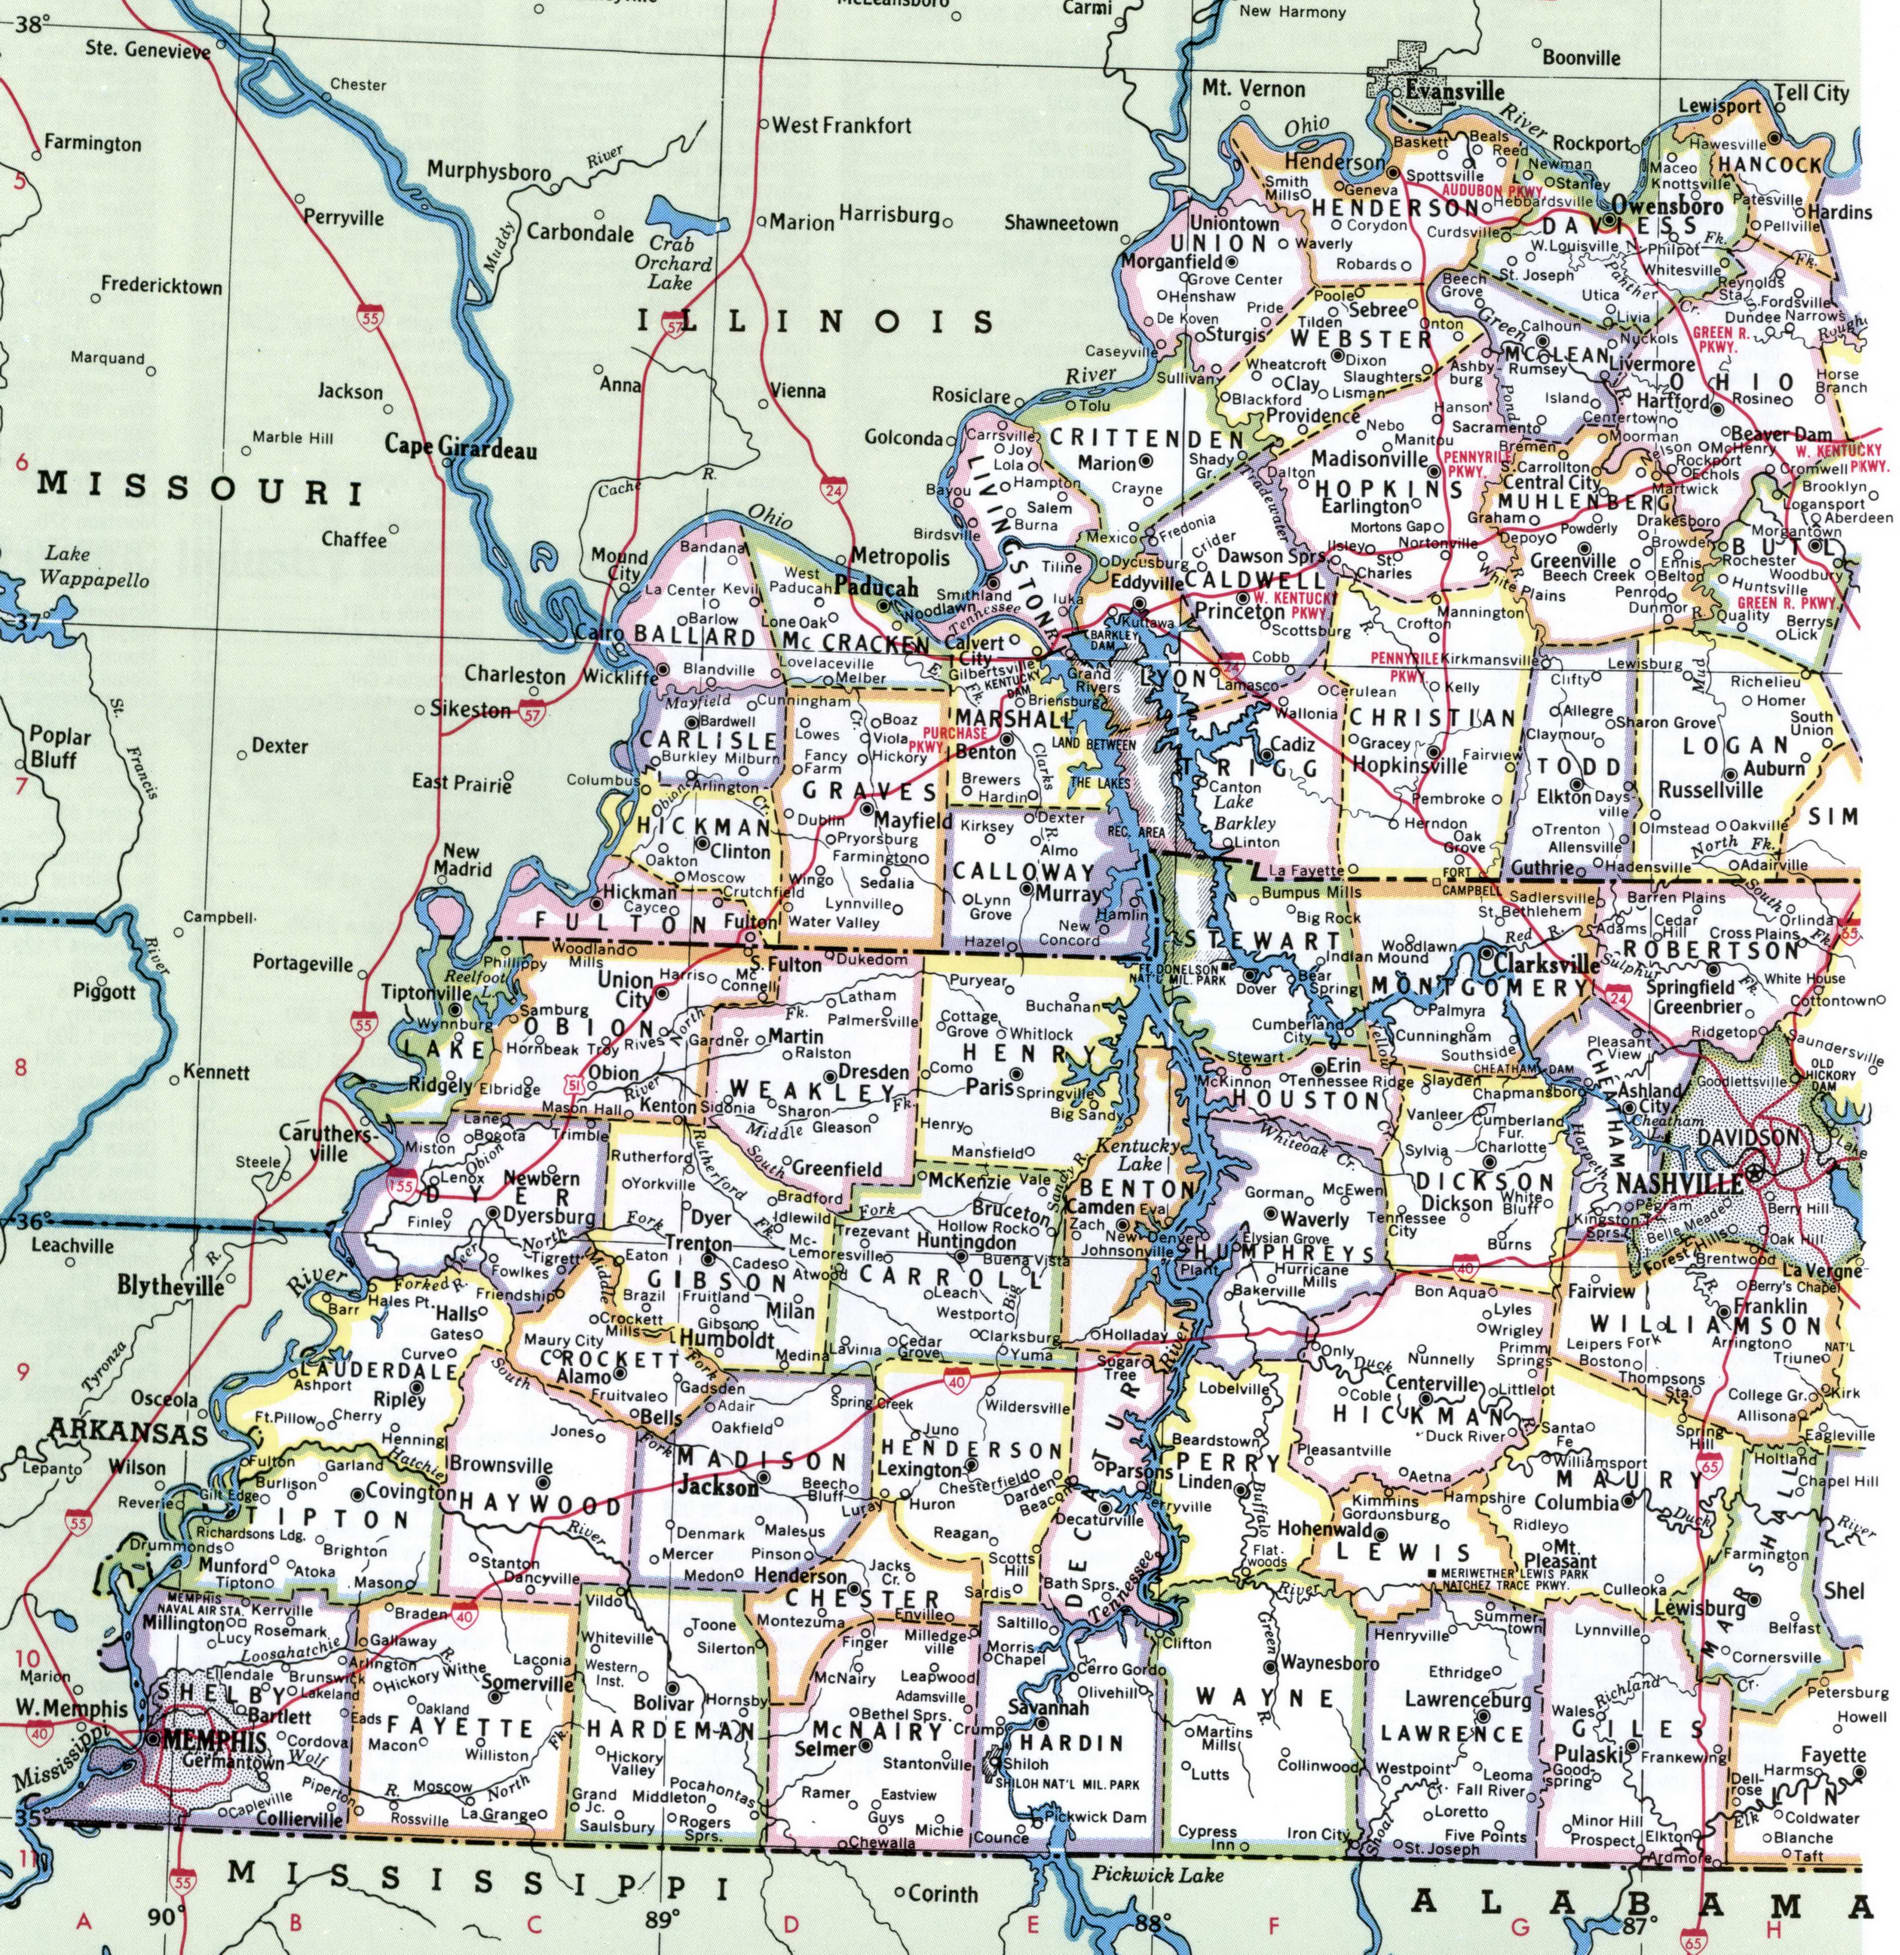 map-of-tennessee-by-city-and-county-get-latest-map-update